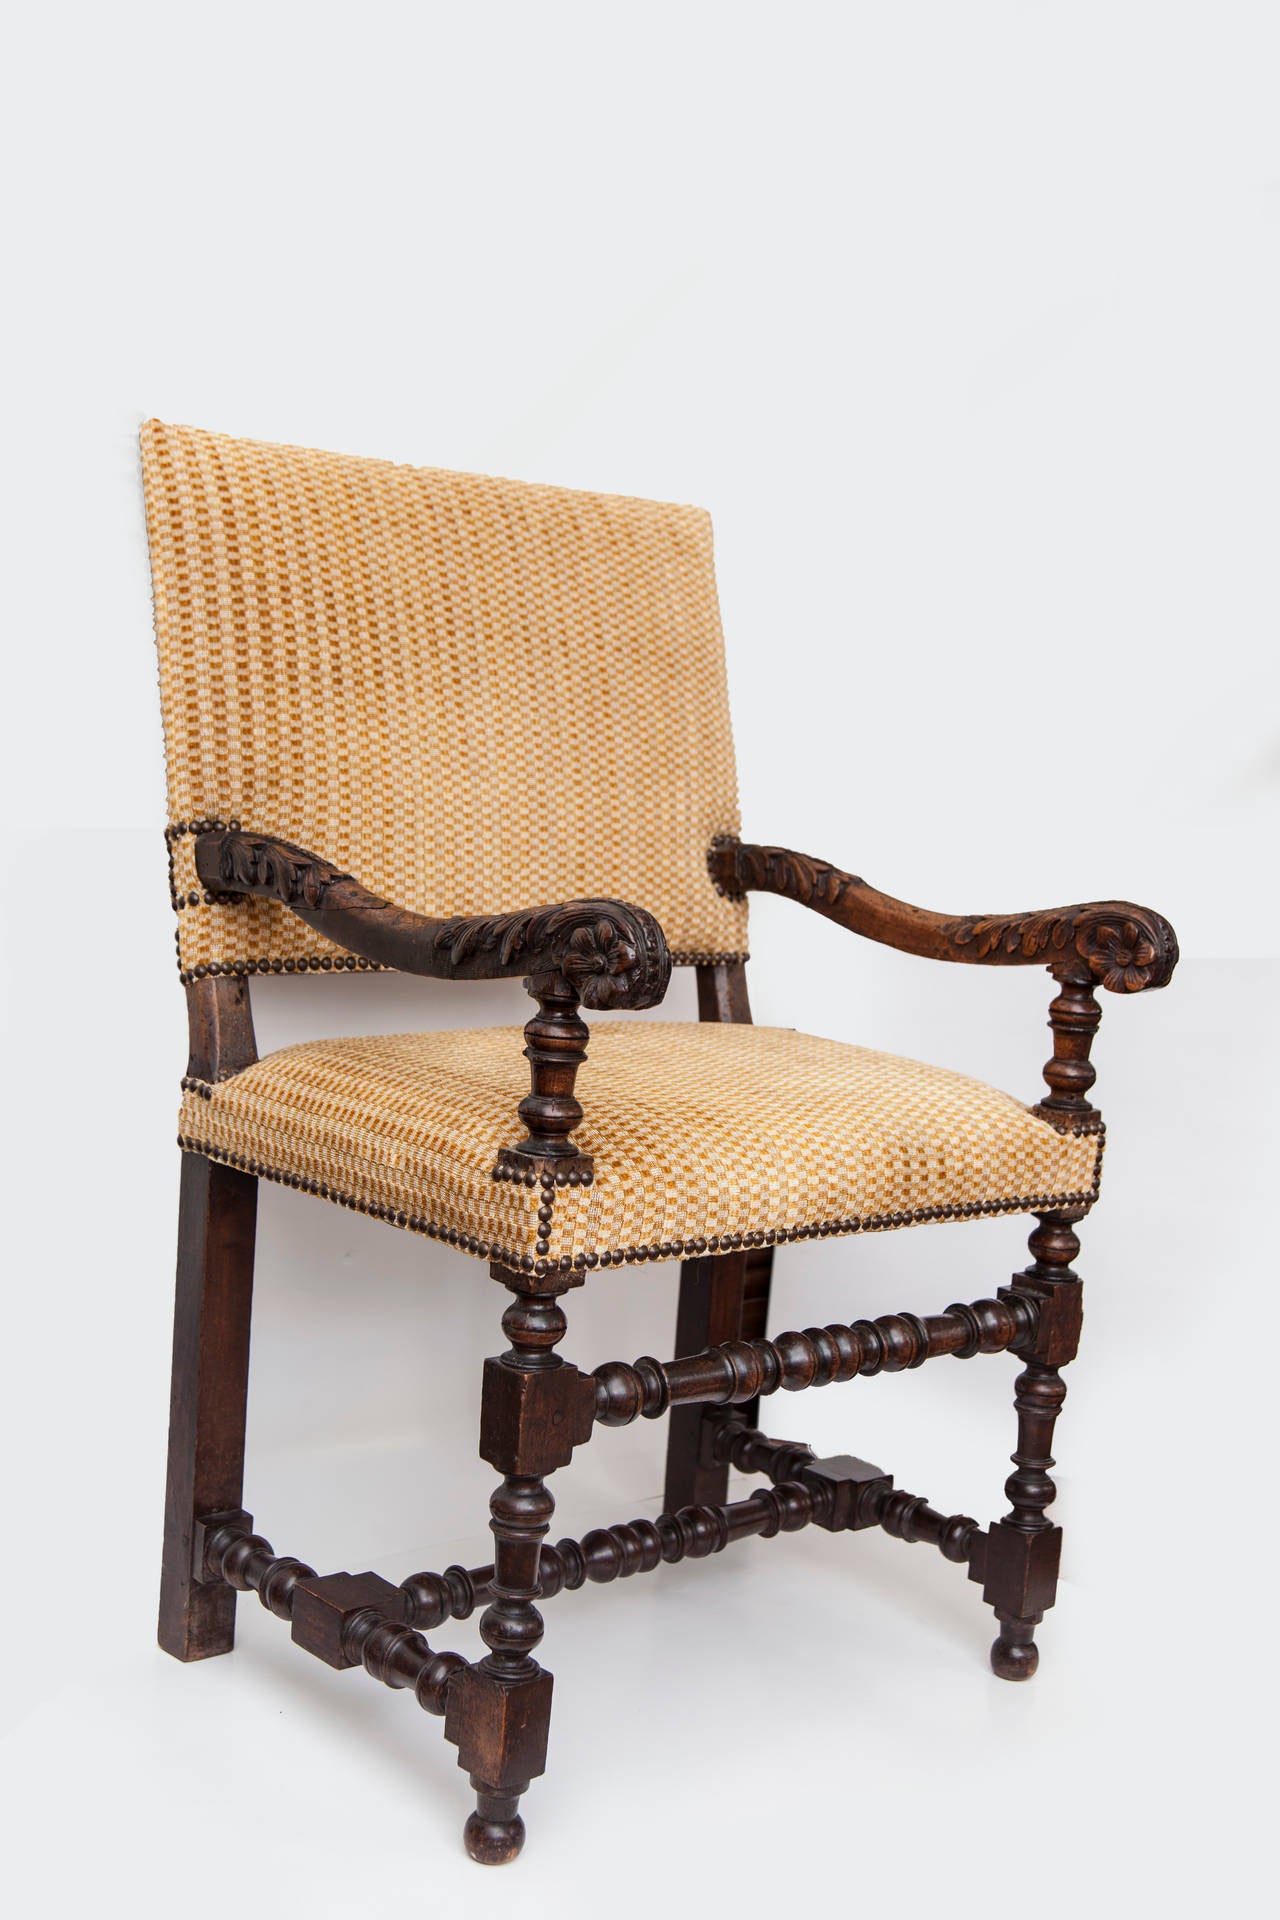 18th century French Louis XV armchair in Italian Renaissance style with nailhead trim and carved walnut arms and legs. Cut velvet in colors of gold and cream upholstery.